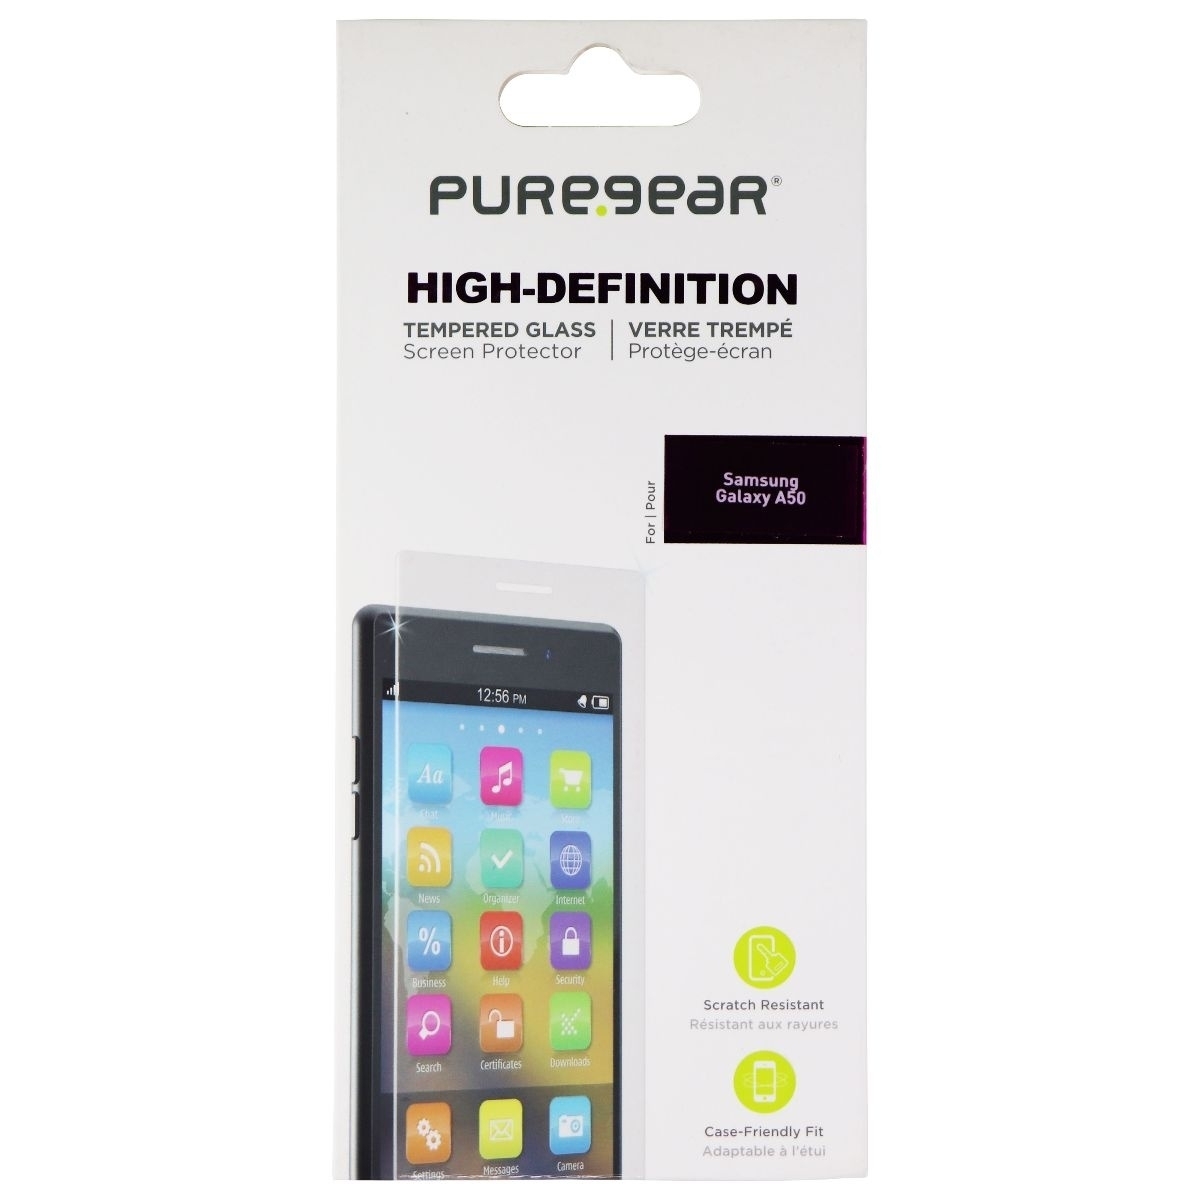 PureGear High-Definition Tempered Glass For Samsung Galaxy A50 - Clear